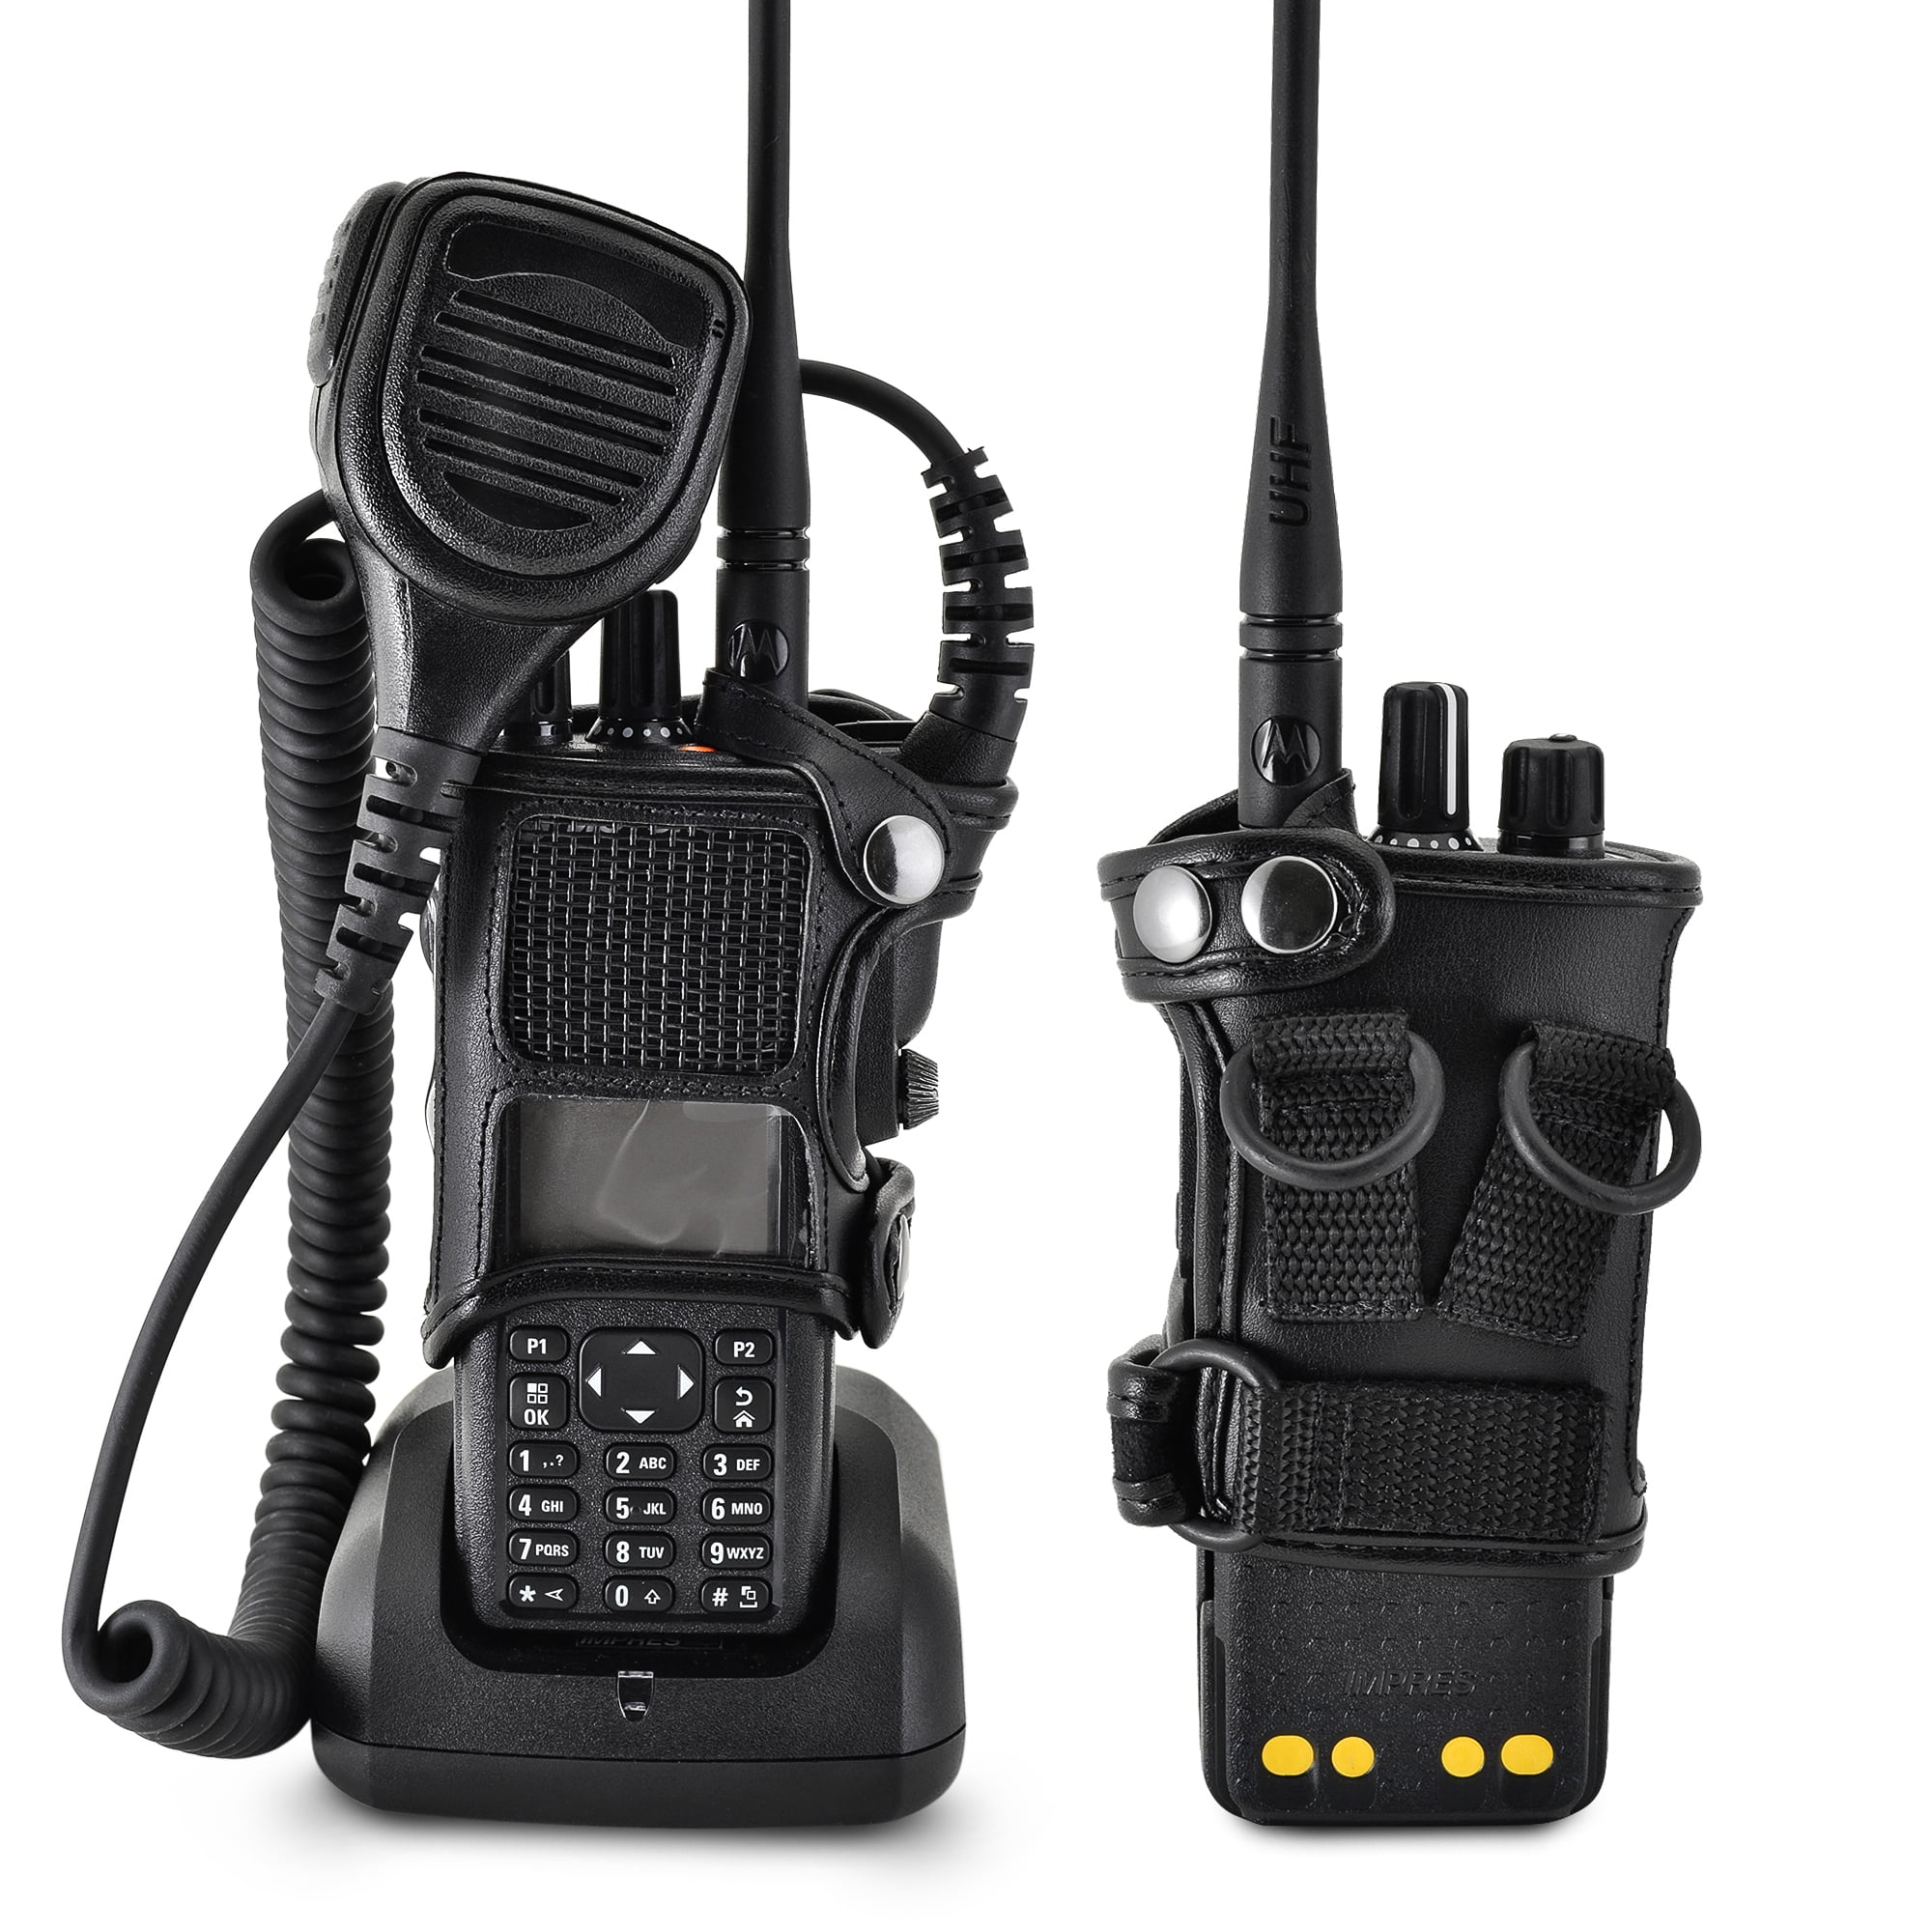 Non-Display Leather Carry Case Holster for Motorola XTS 5000 Two Way Radio 